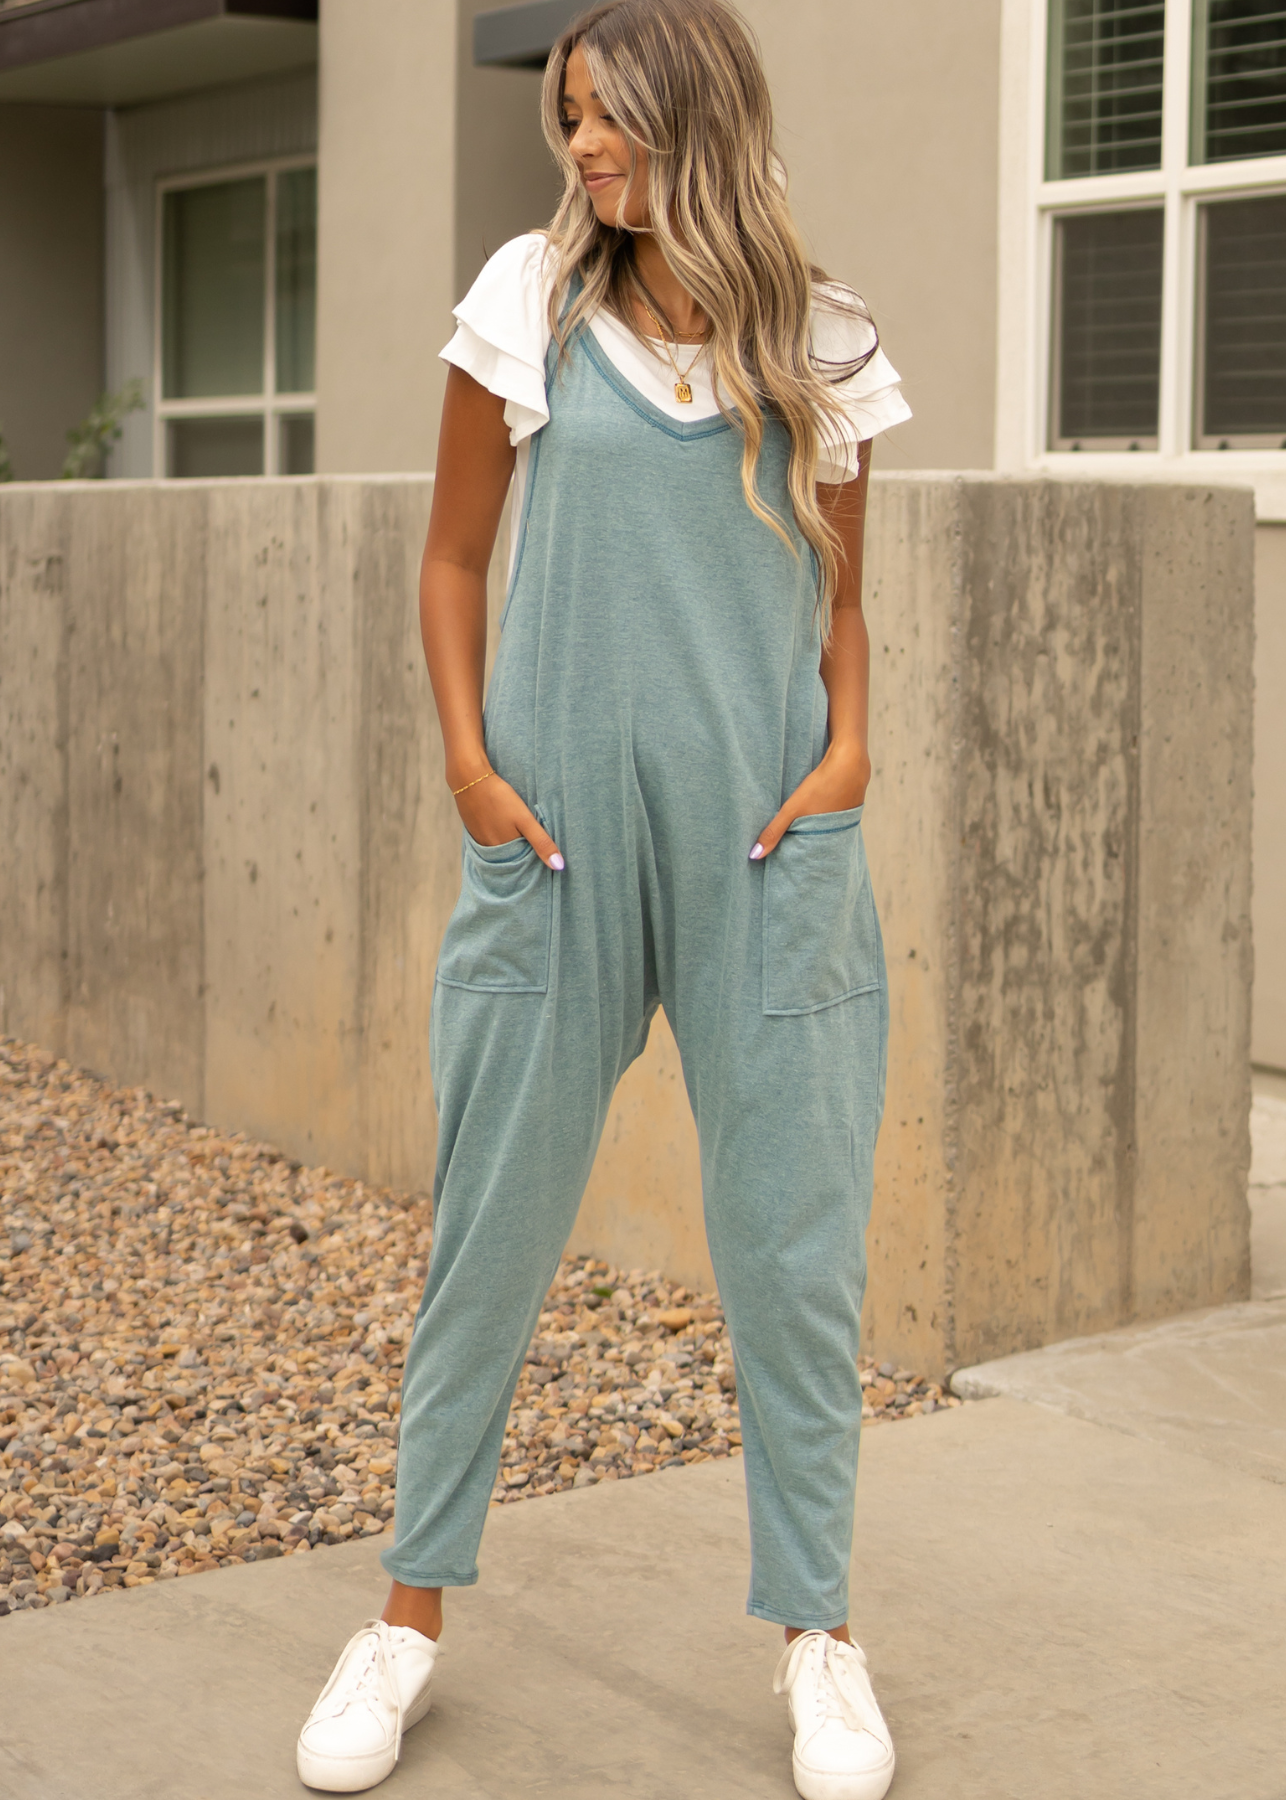 Dusty teal jumpsuit with a v-neck